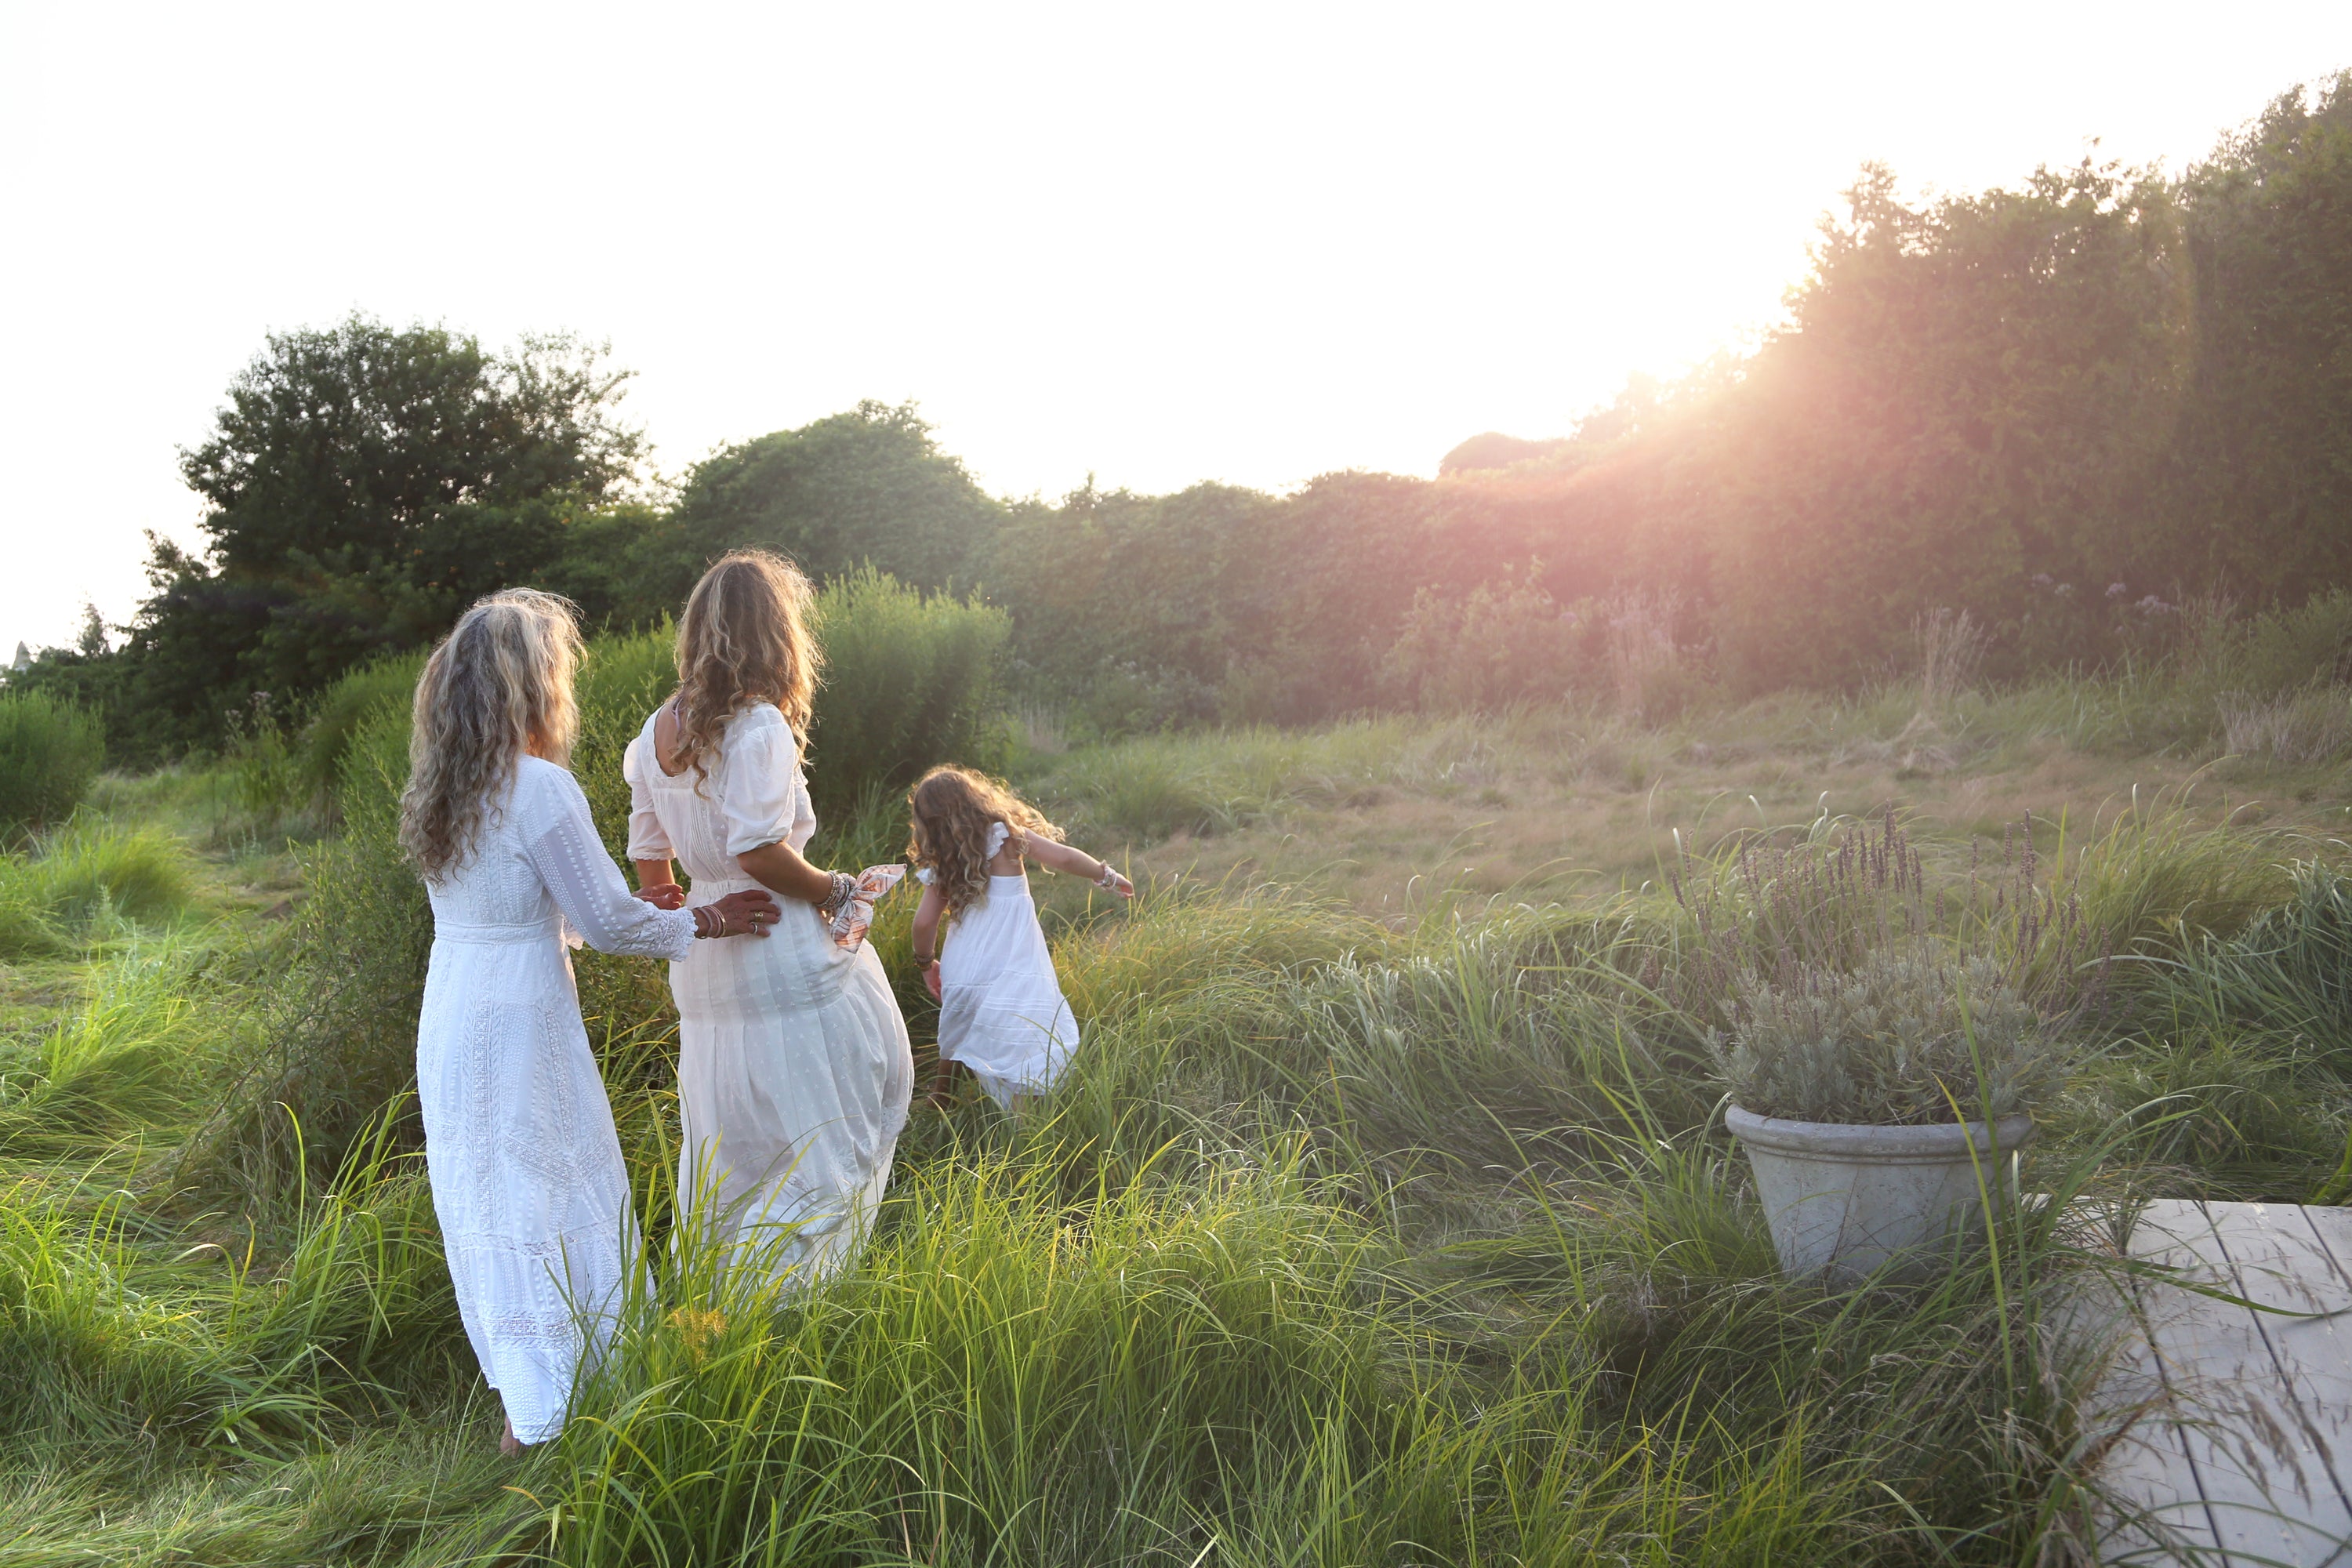 Founder and creative director Rebecca Hessel Cohen and her daughters in a grassy field